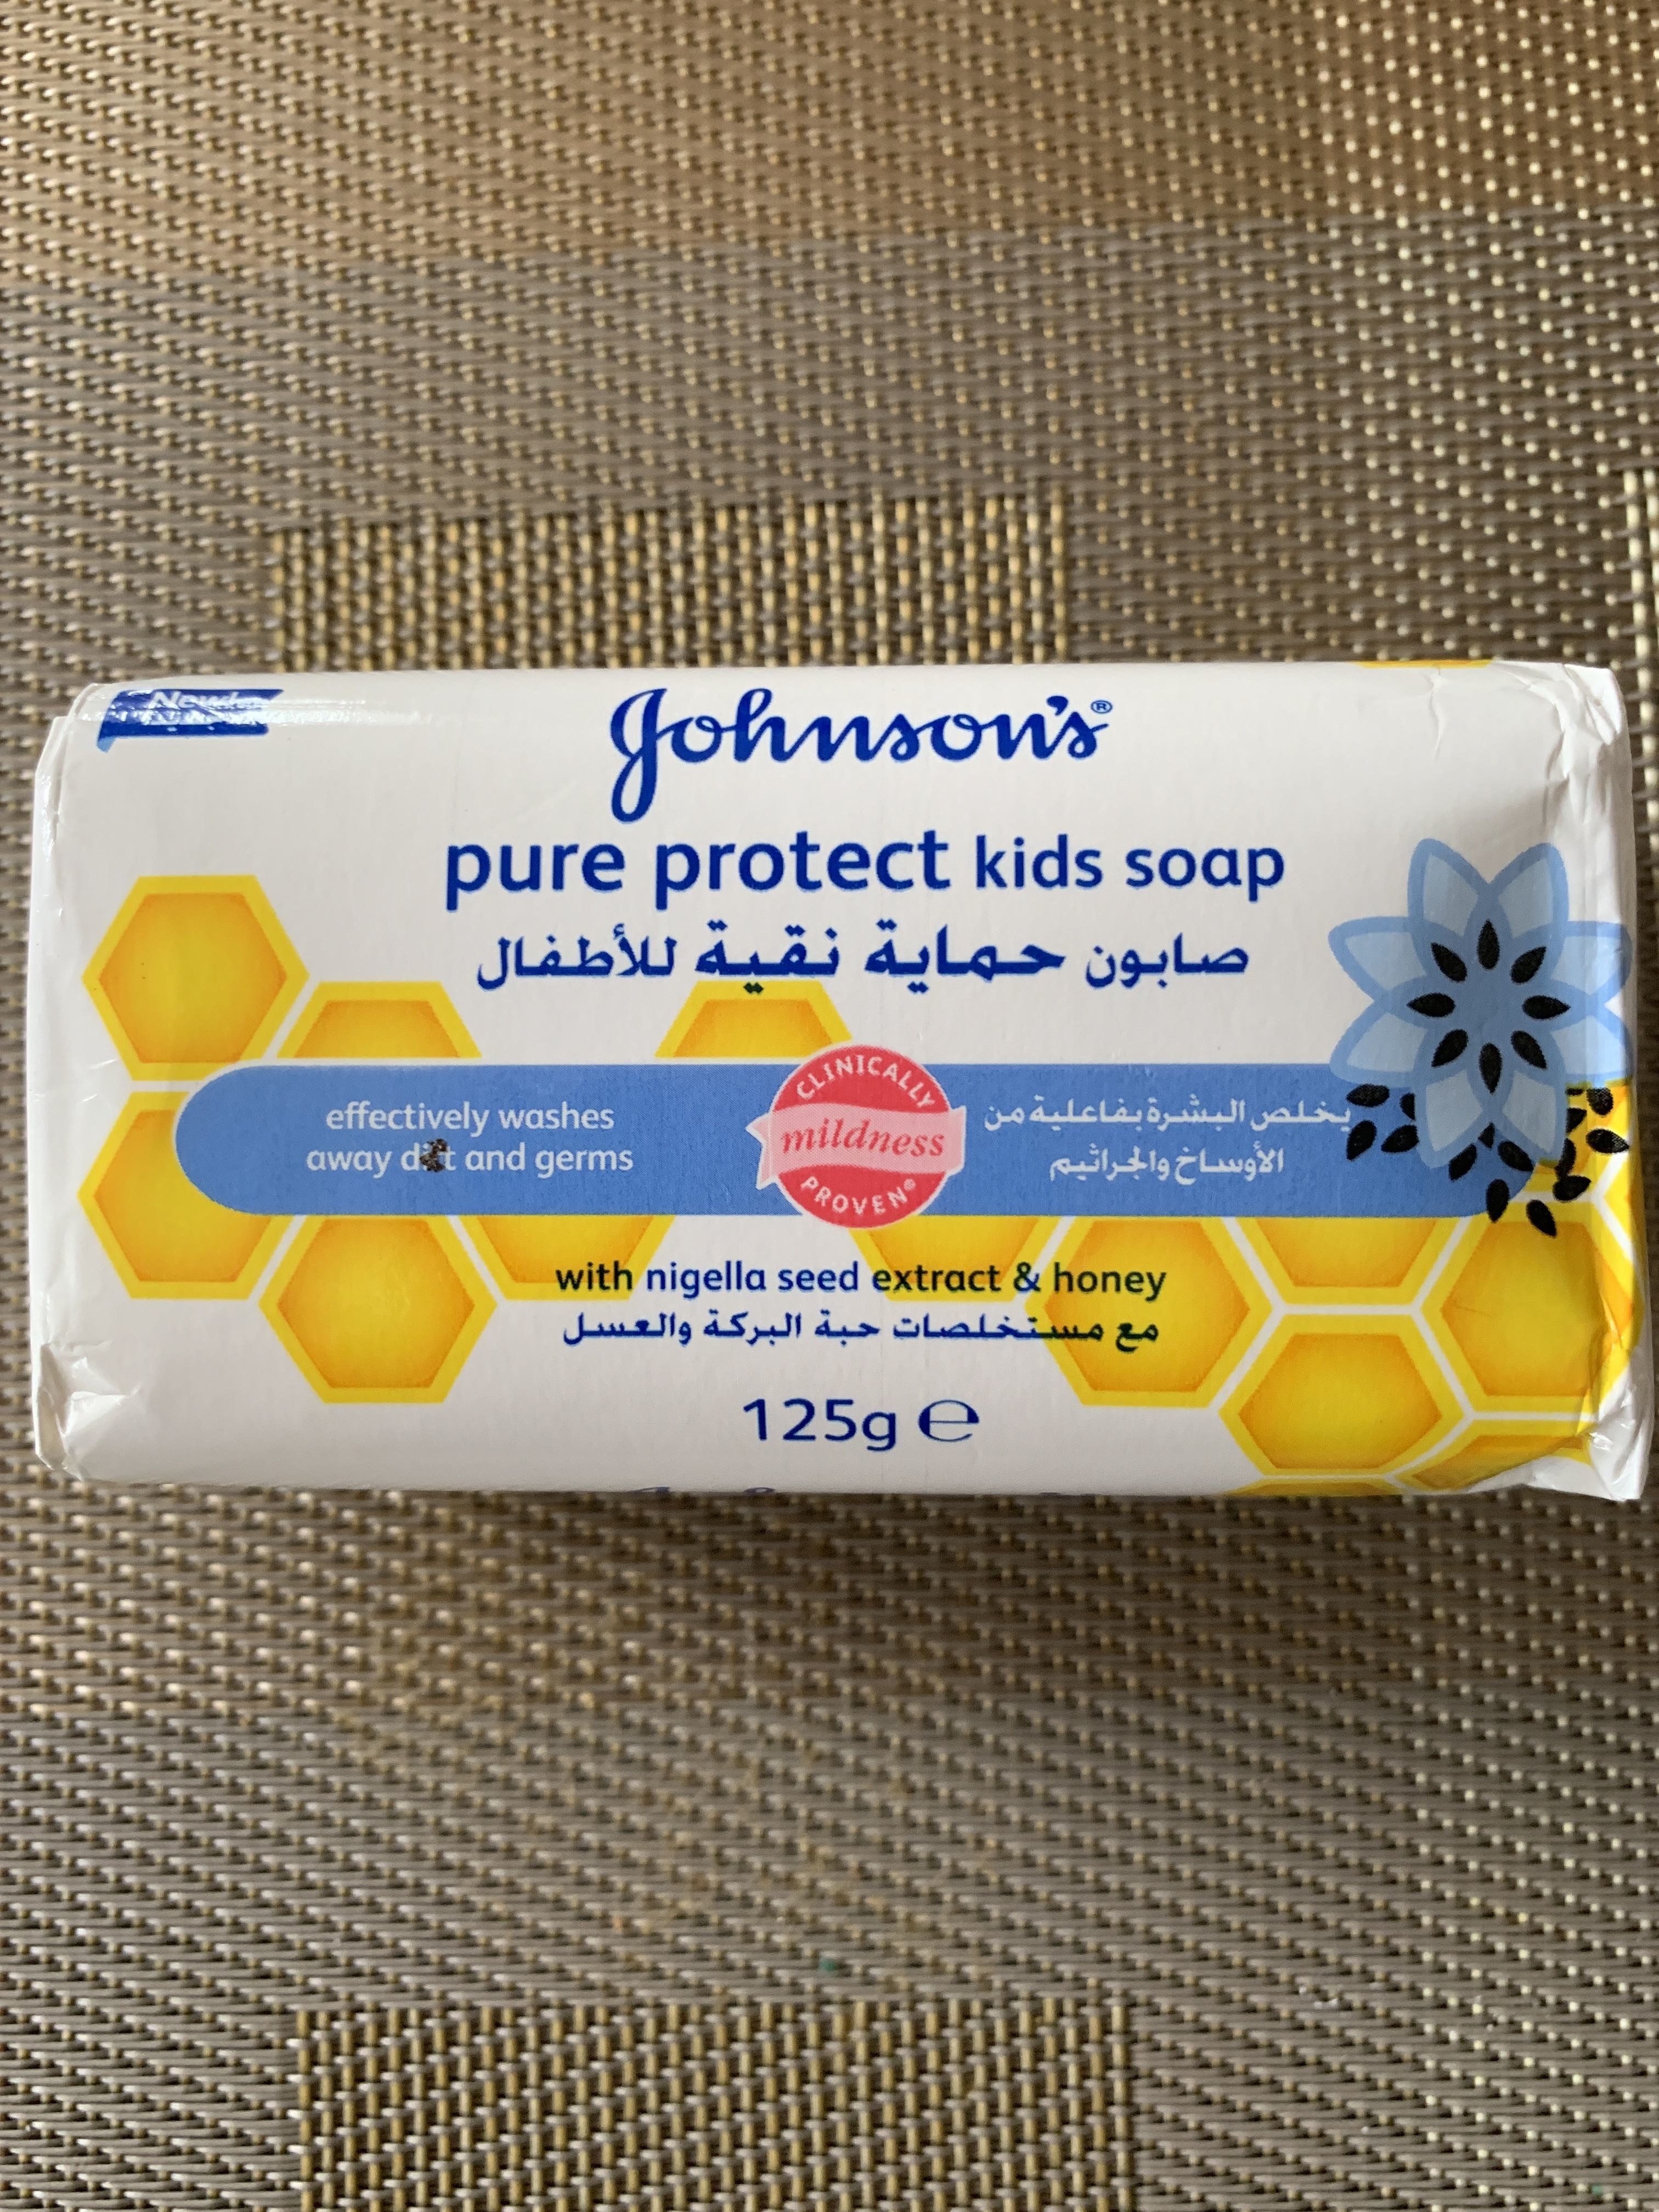 PURE PROTECT Kids soap - Product - fr